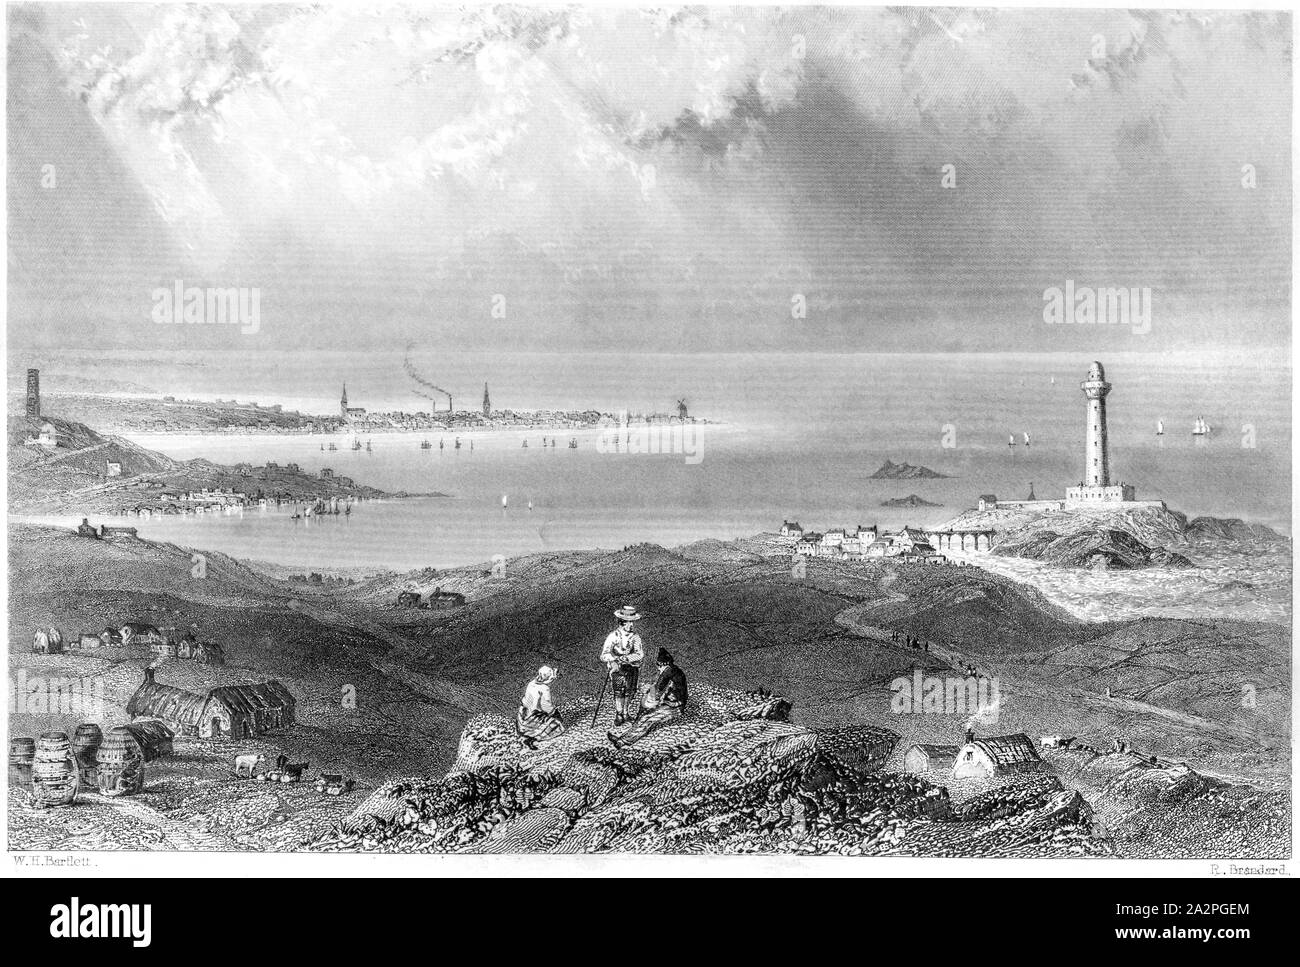 An engraving of Peterhead scanned at high resolution from a book printed in 1842.  Believed copyright free. Stock Photo